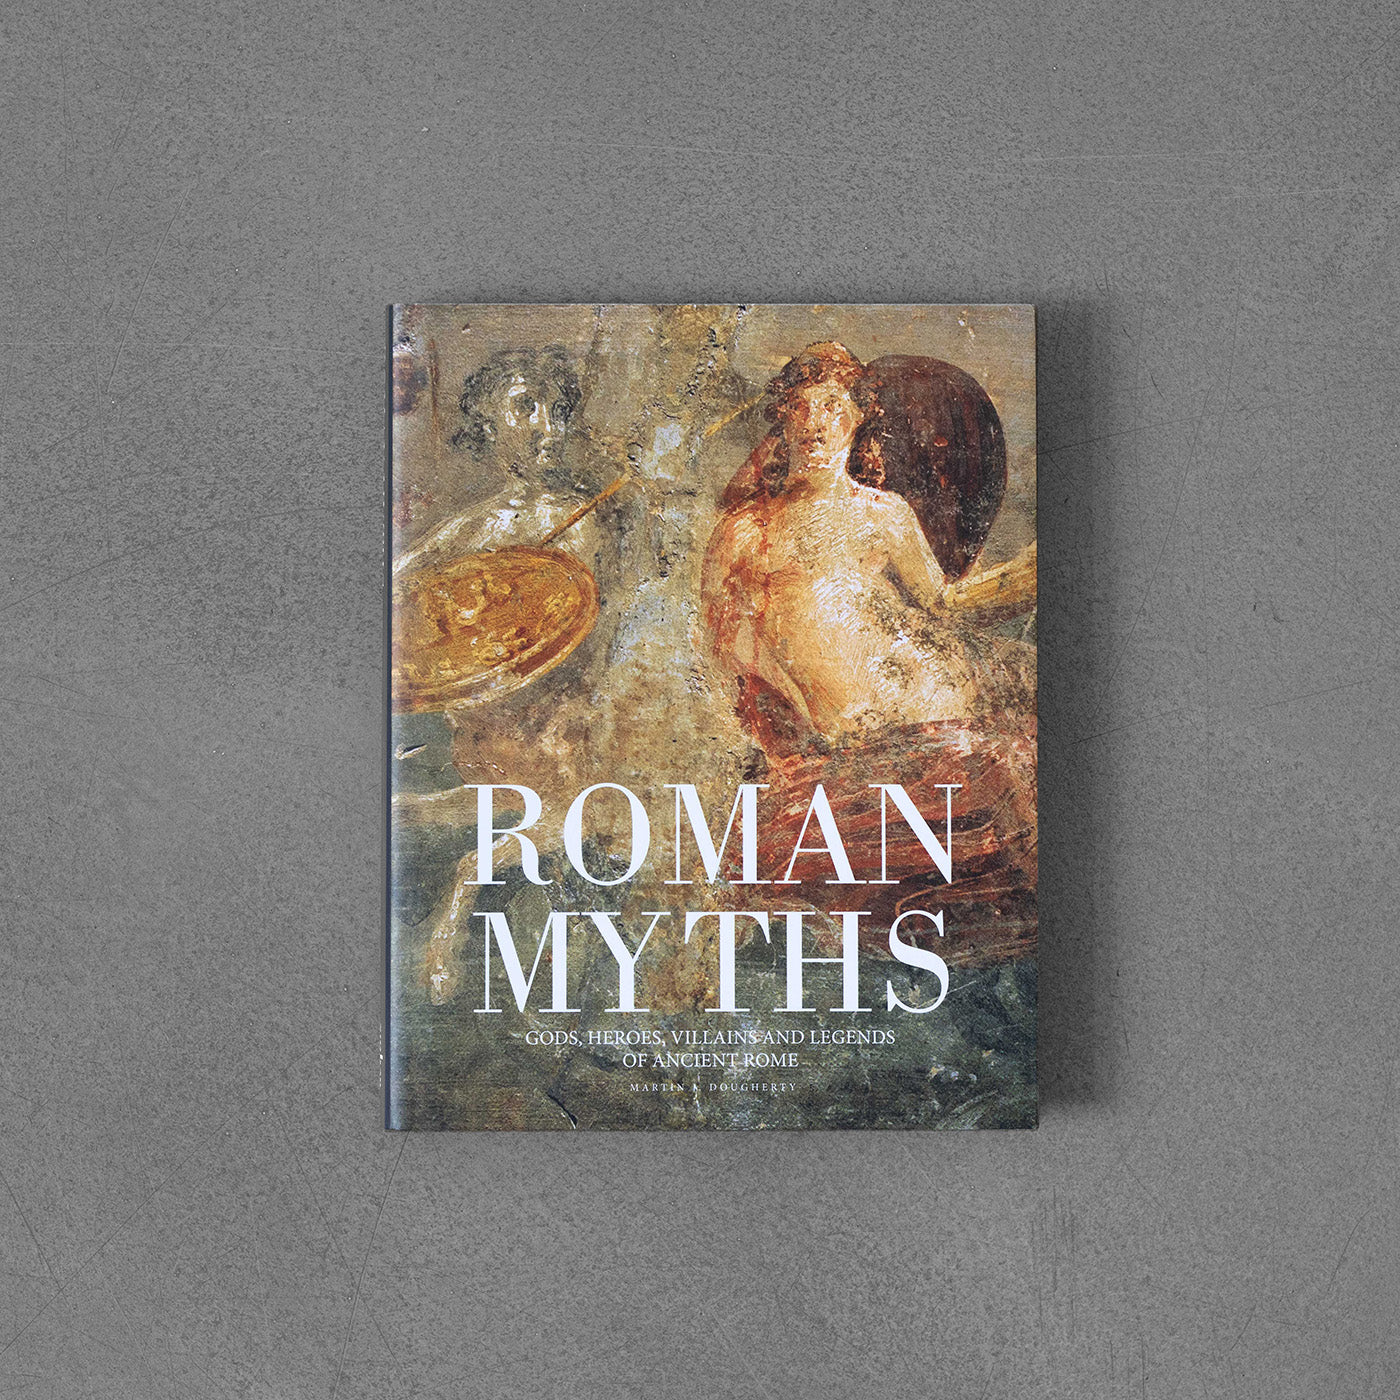 Roman Myths: Gods, Heroes, Villains and Legends of Ancient Rome